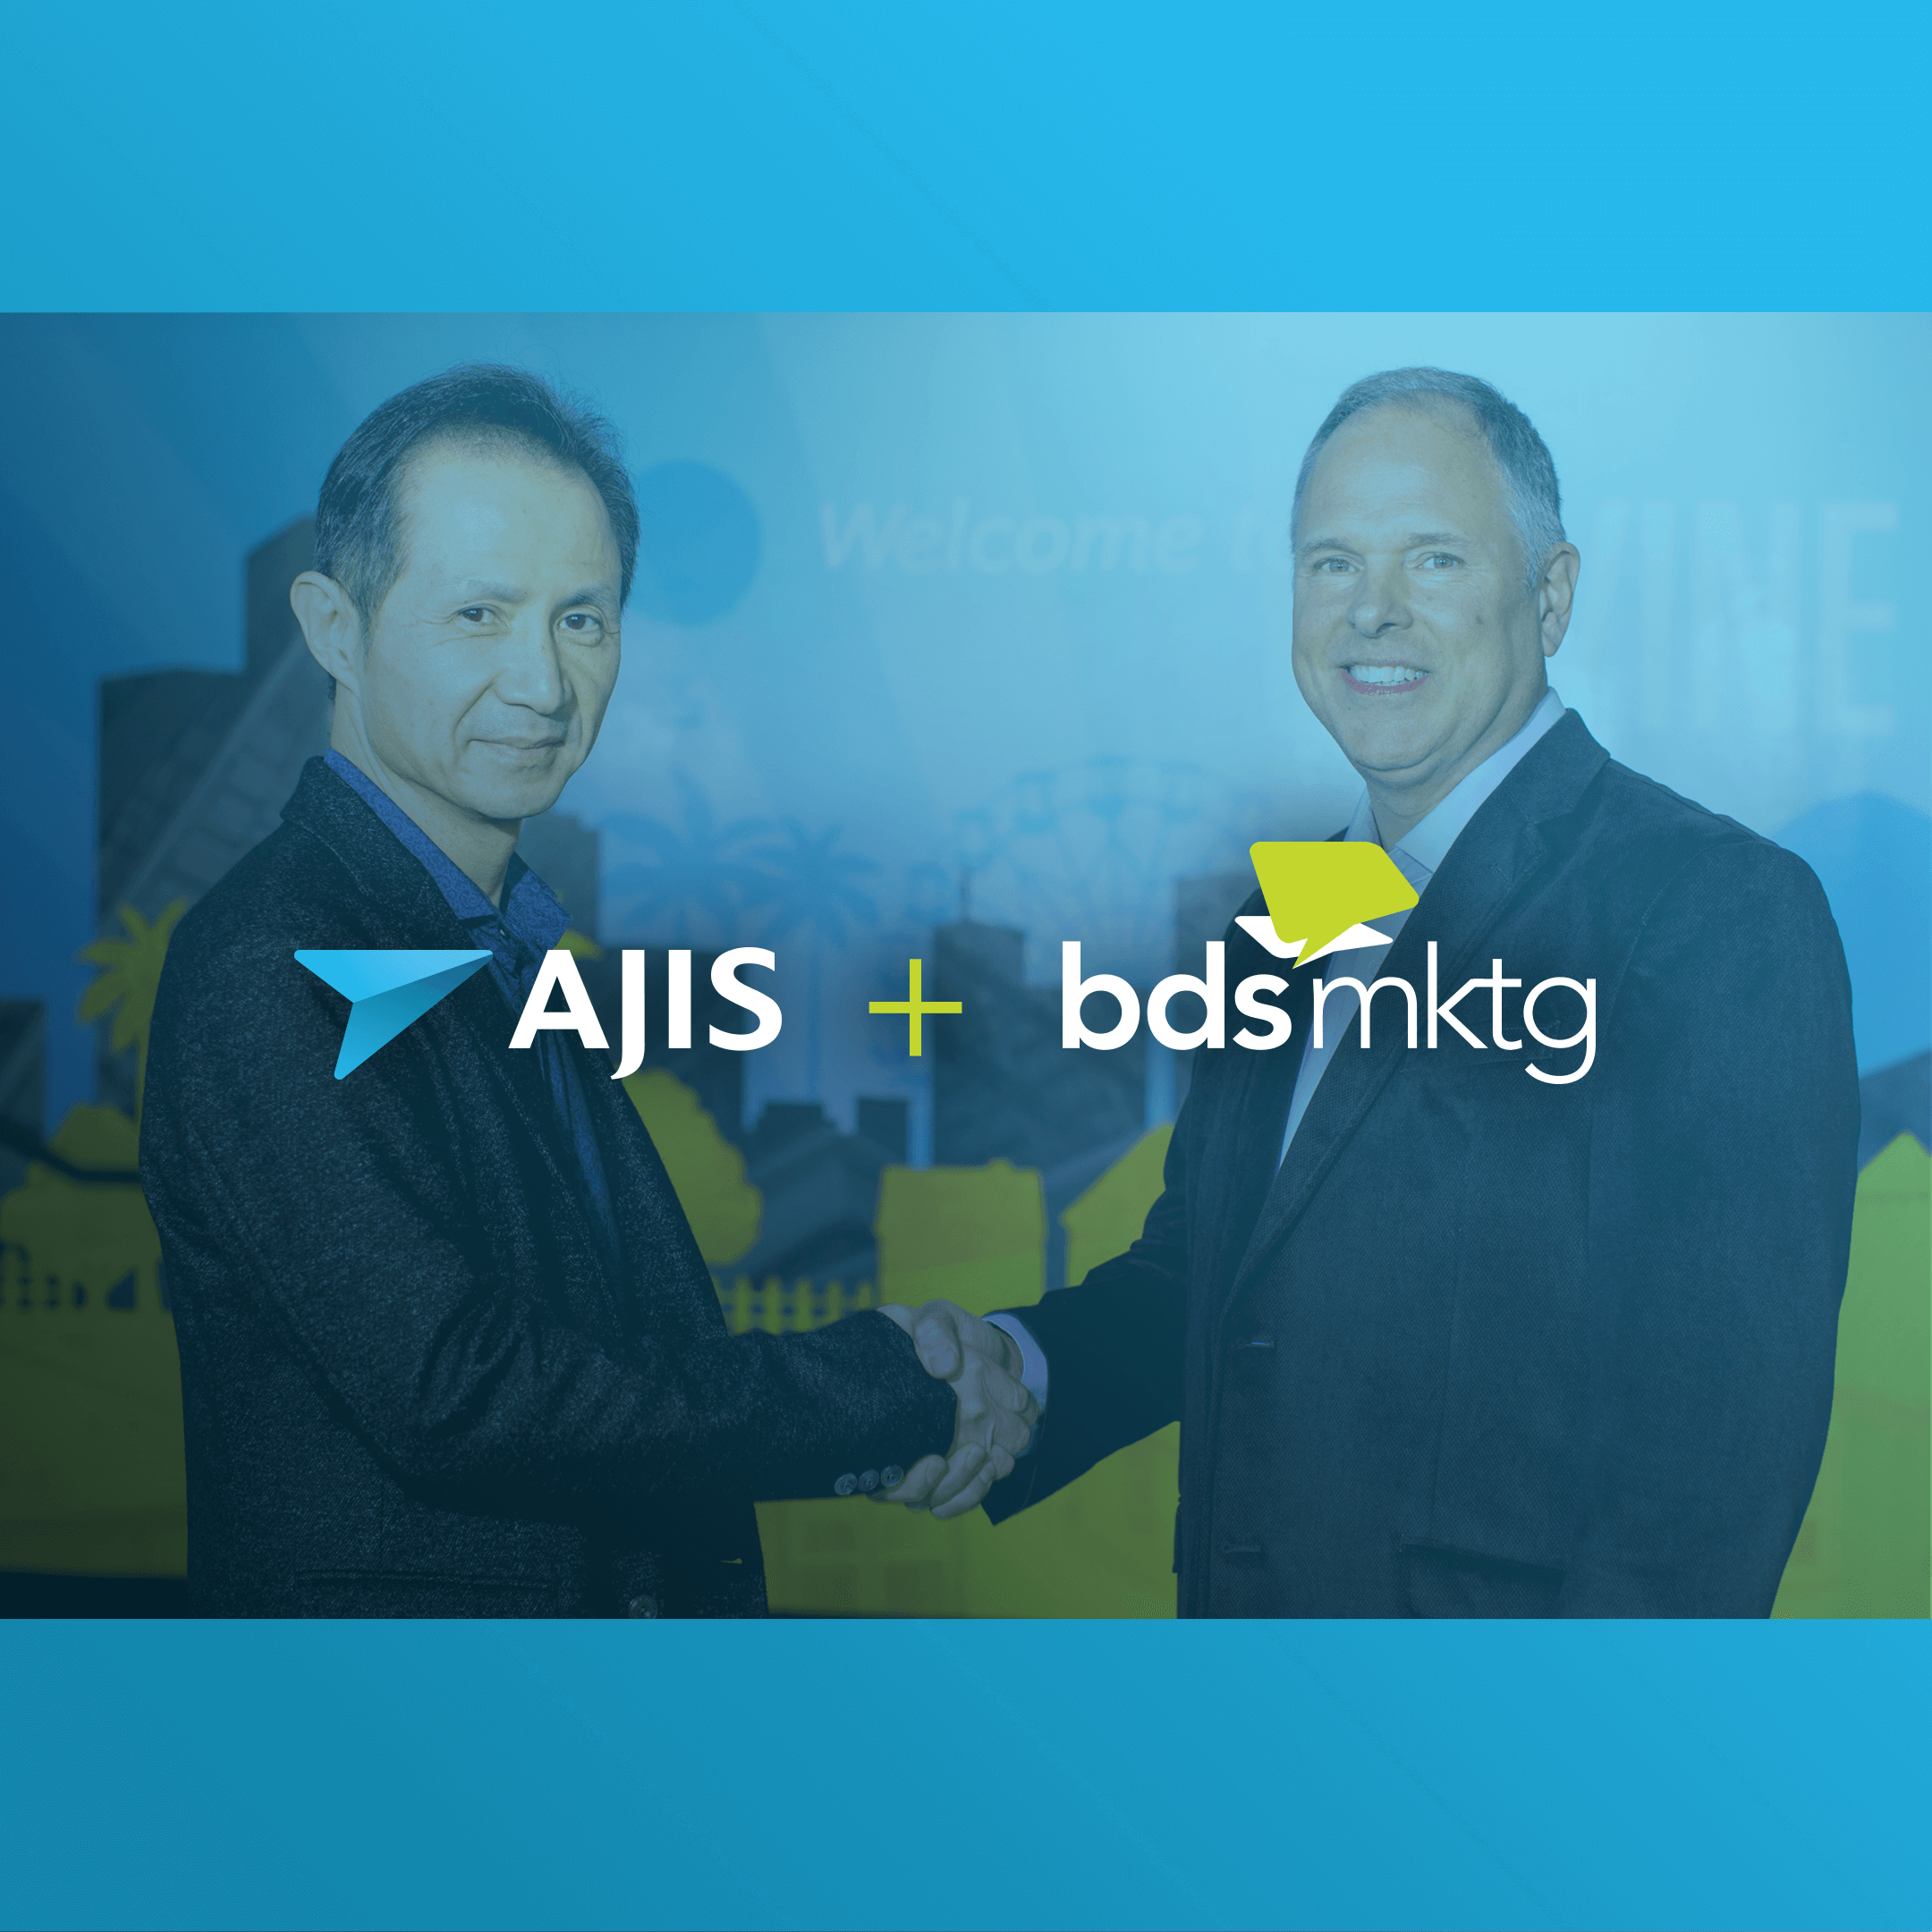 BDSmktg Partners with AJIS Co., Ltd. to Launch Their Technical Break Fix Service in Asia